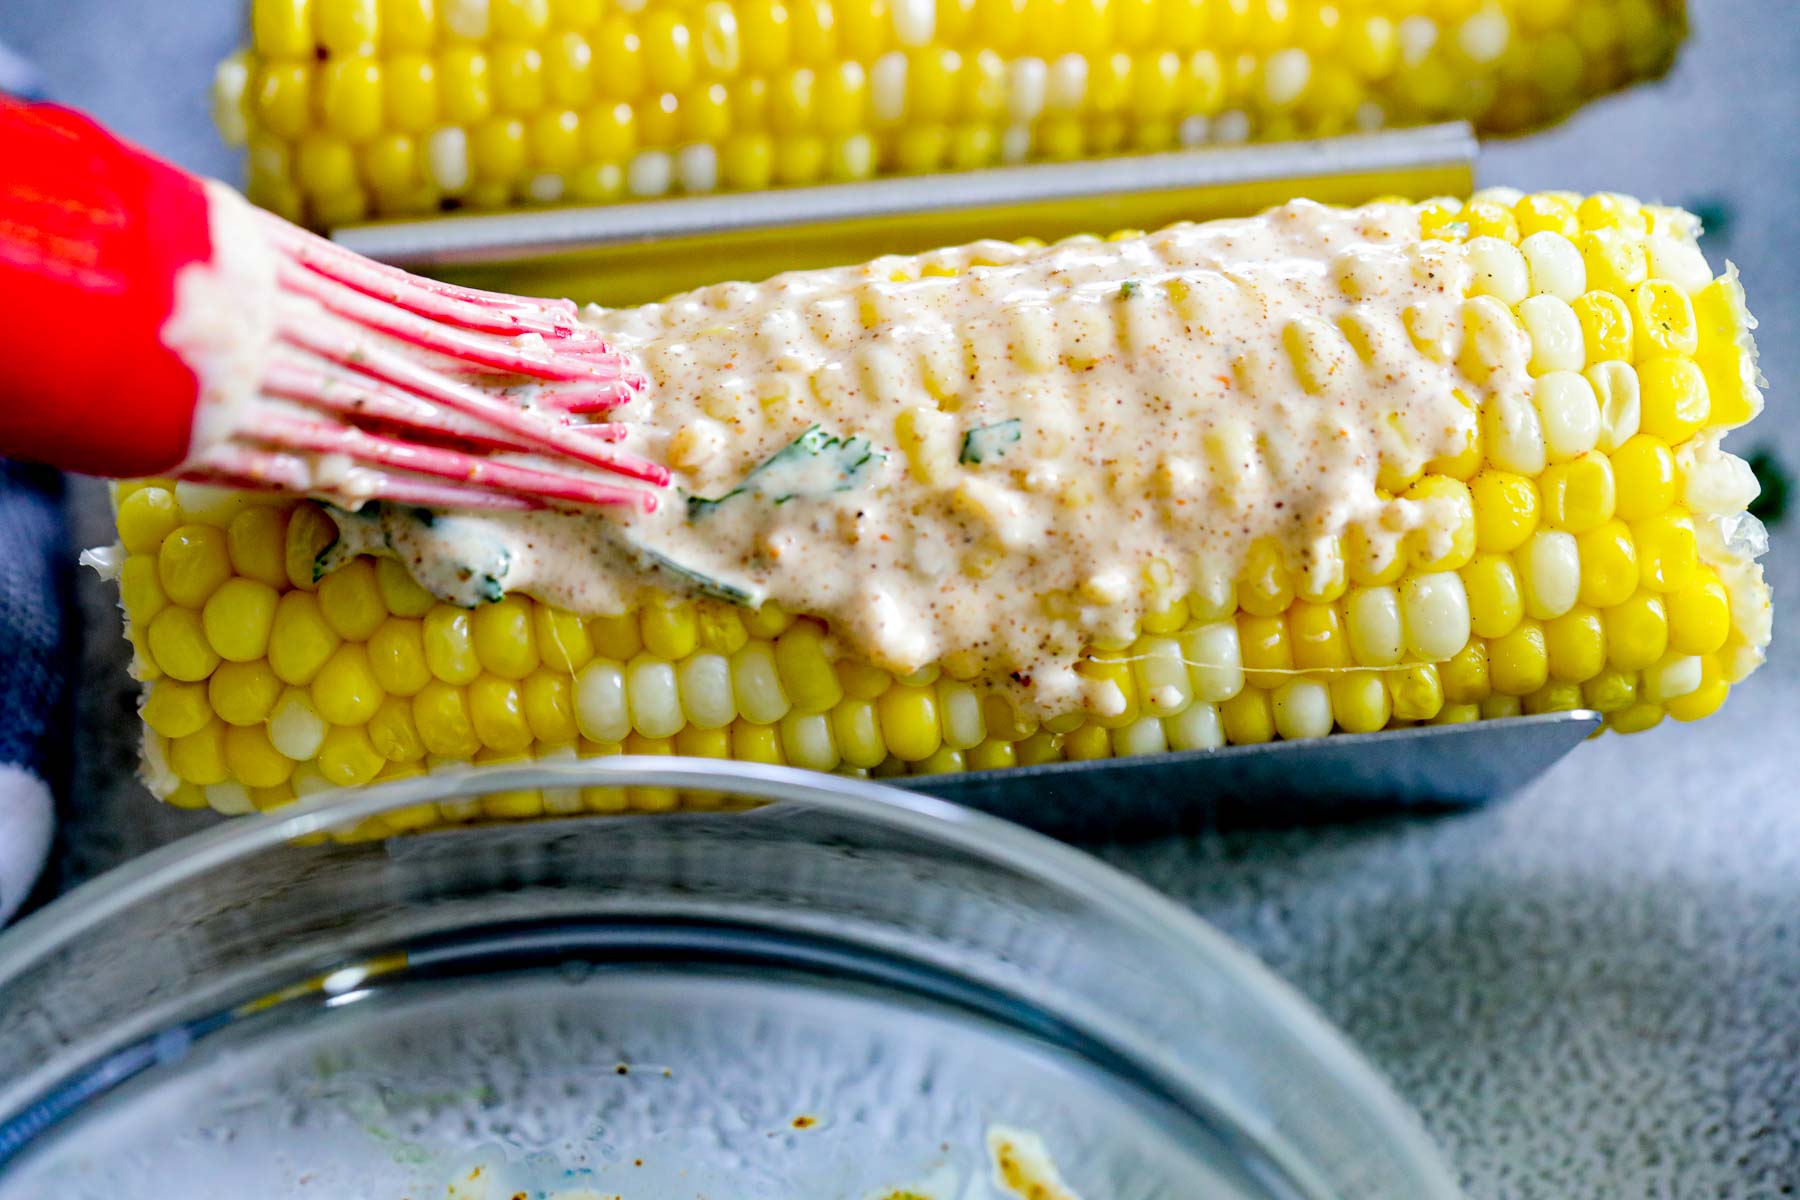 brushing on tangy cream sauce on an ear of yellow corn